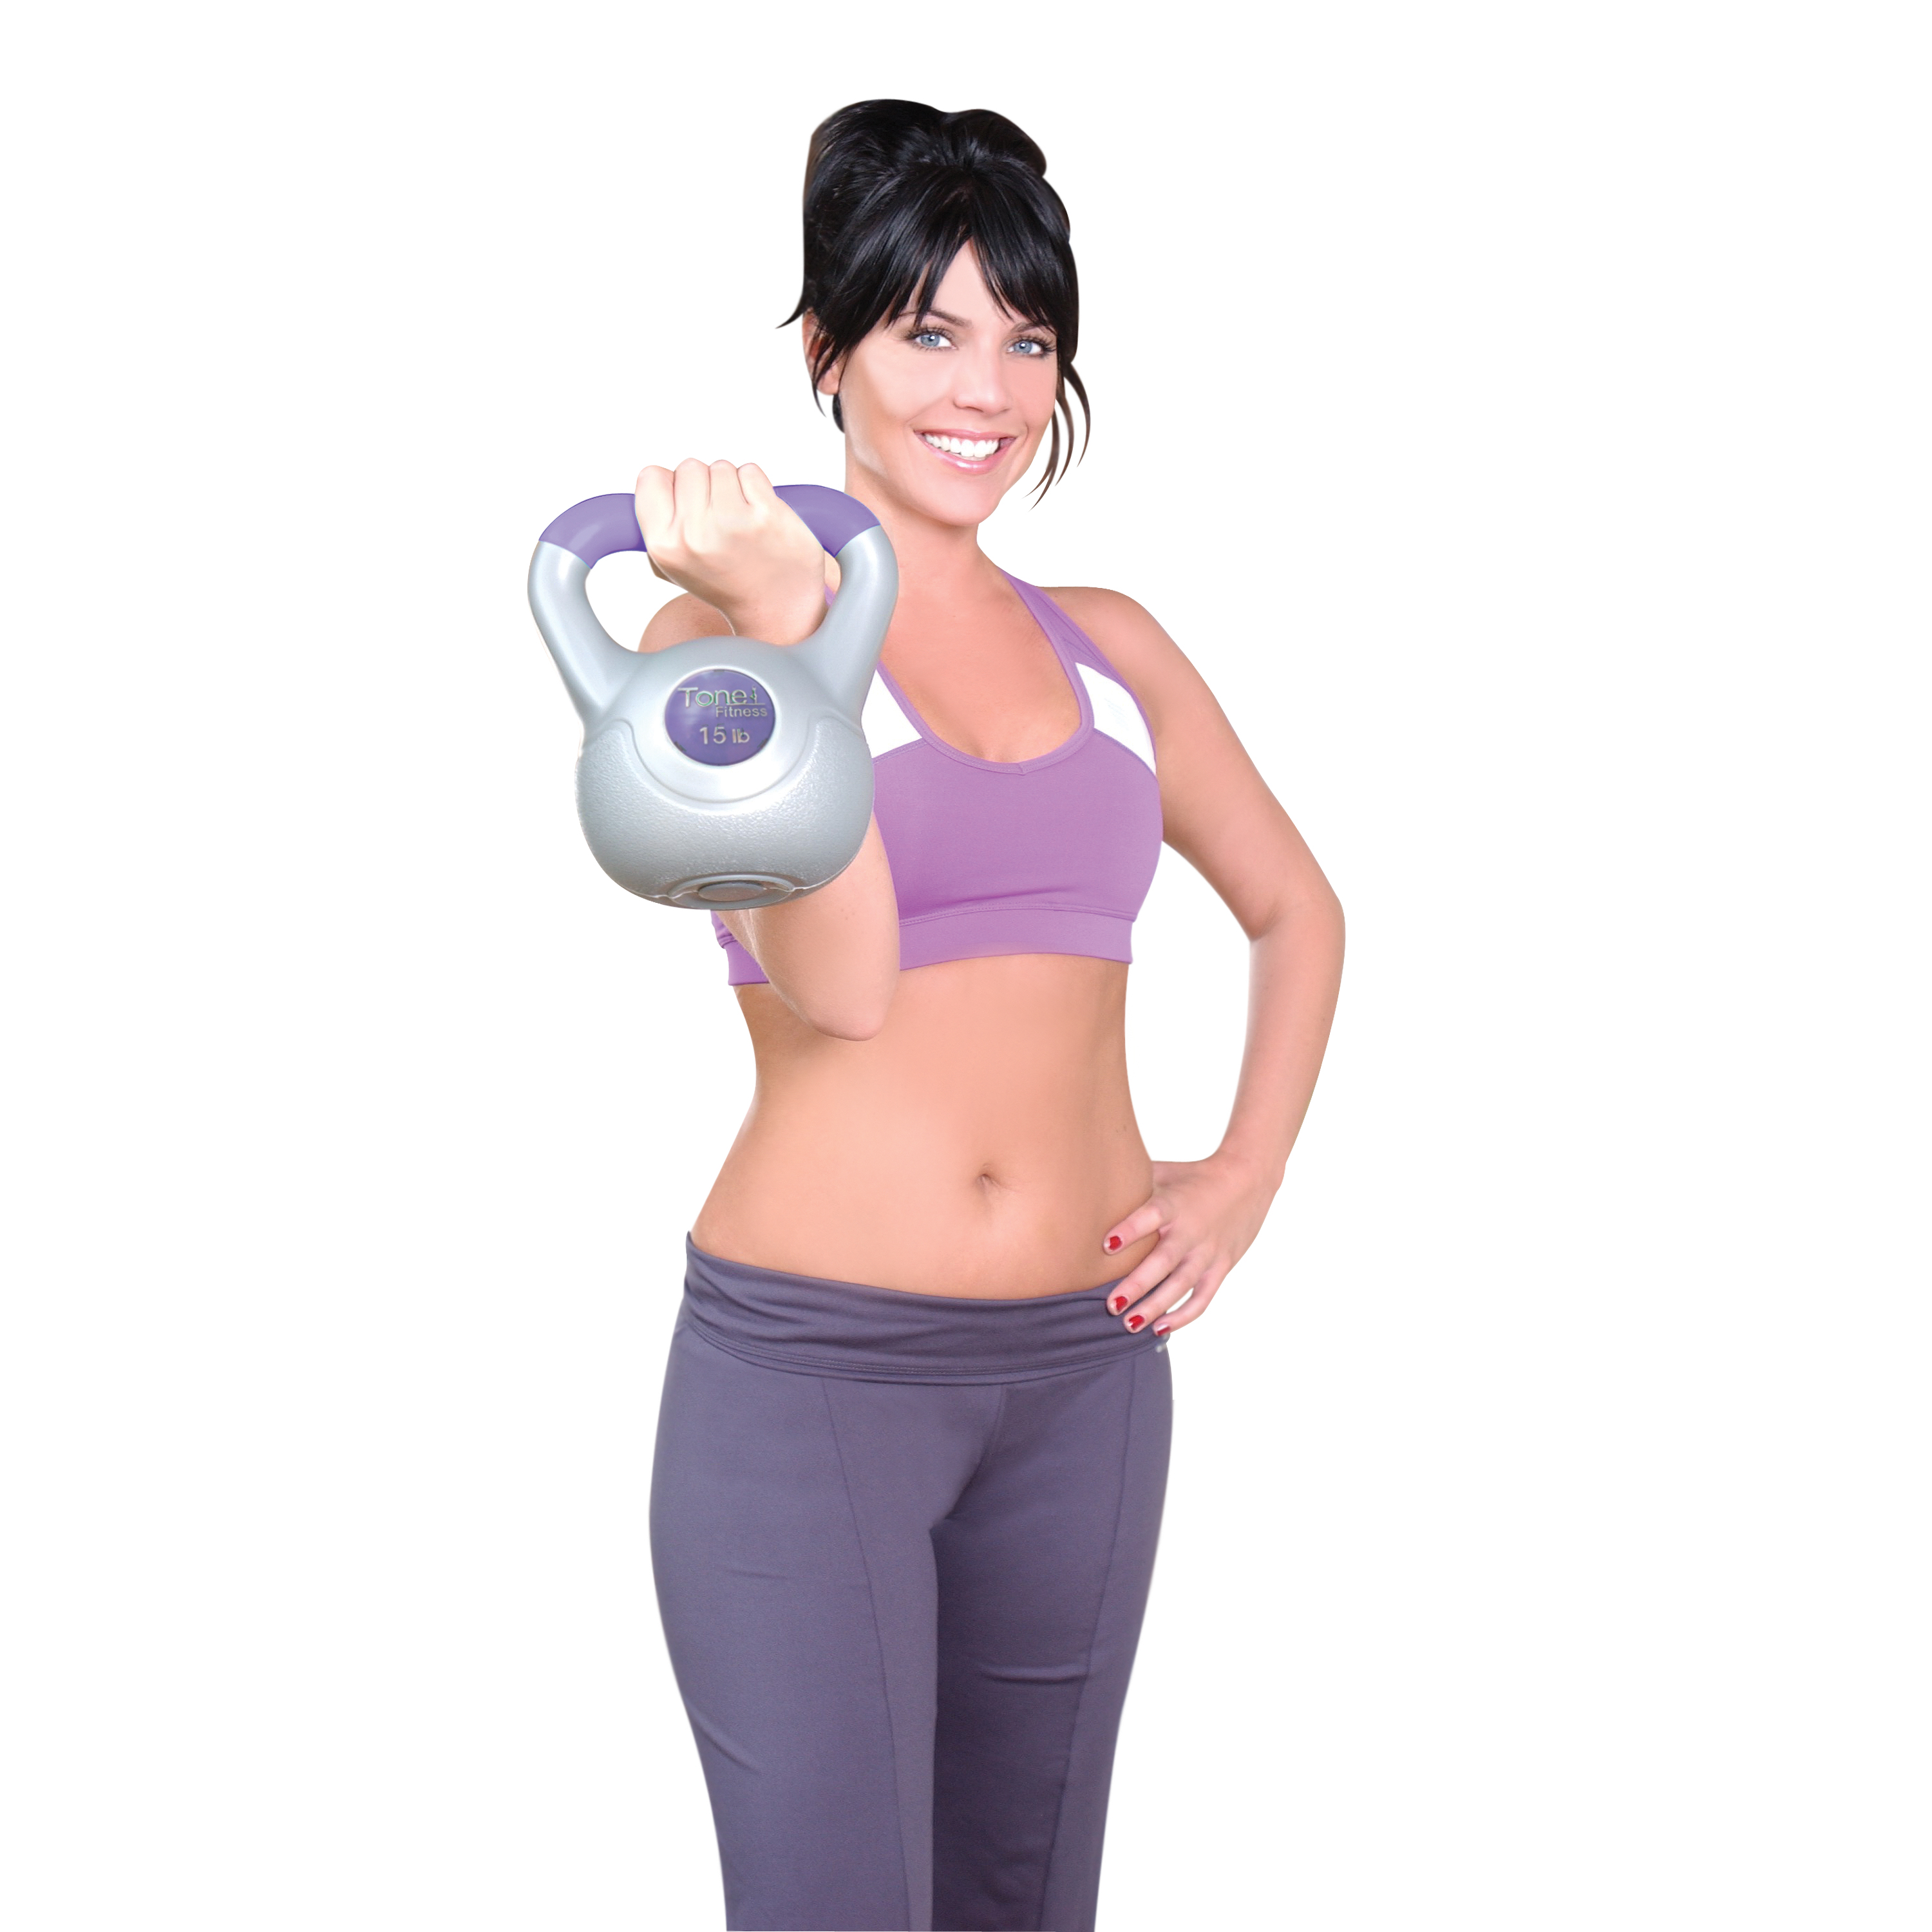 Tone Fitness 30 Lbs. Kettlebell Set, Includes 5-15 Lbs. - image 5 of 5